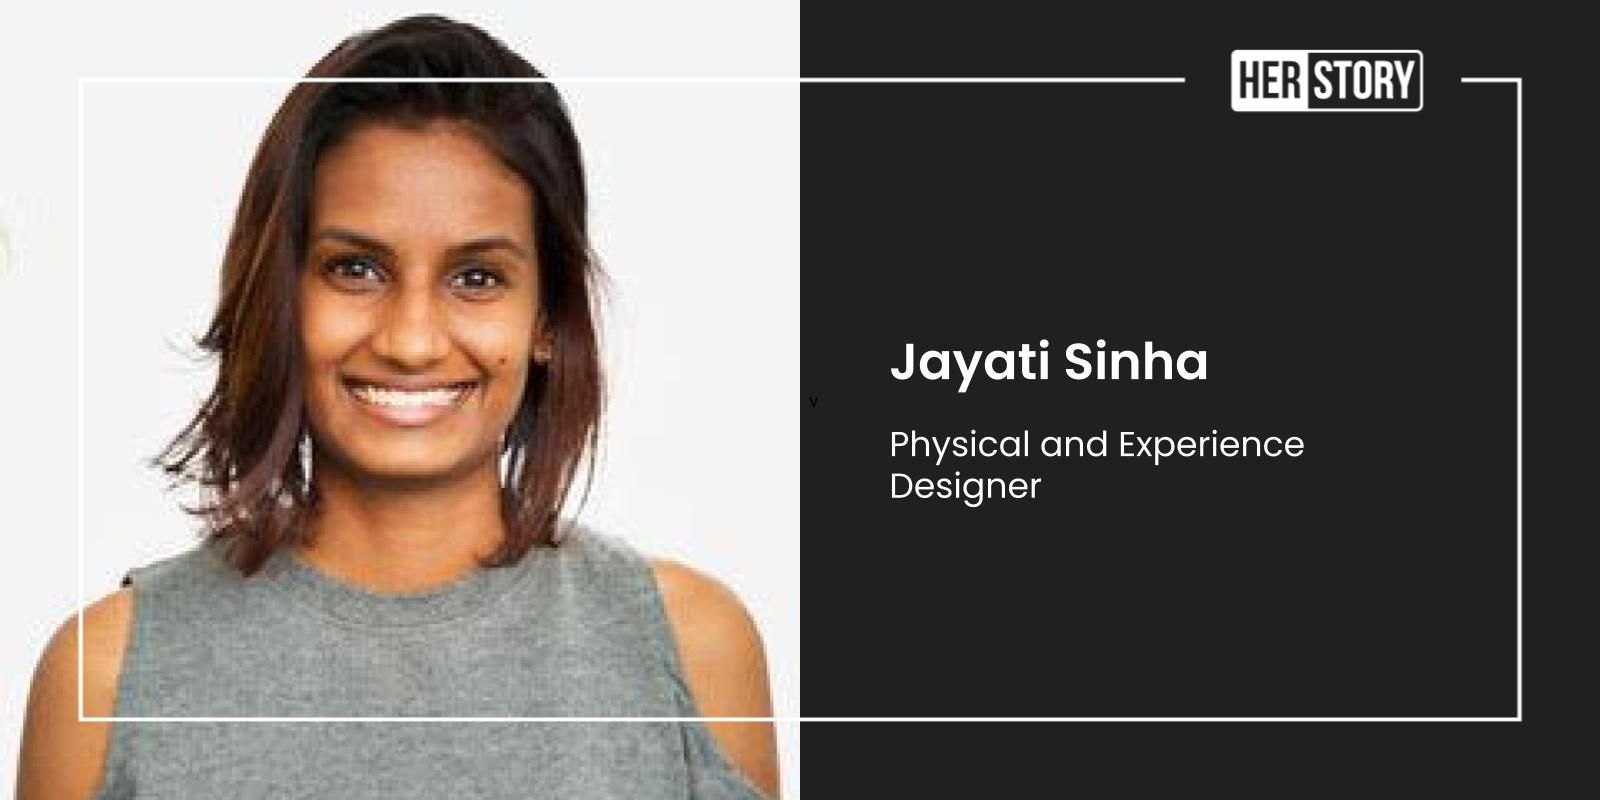 Meet Jayati Sinha, who took inspiration from a Disney show and decided to become a visual designer